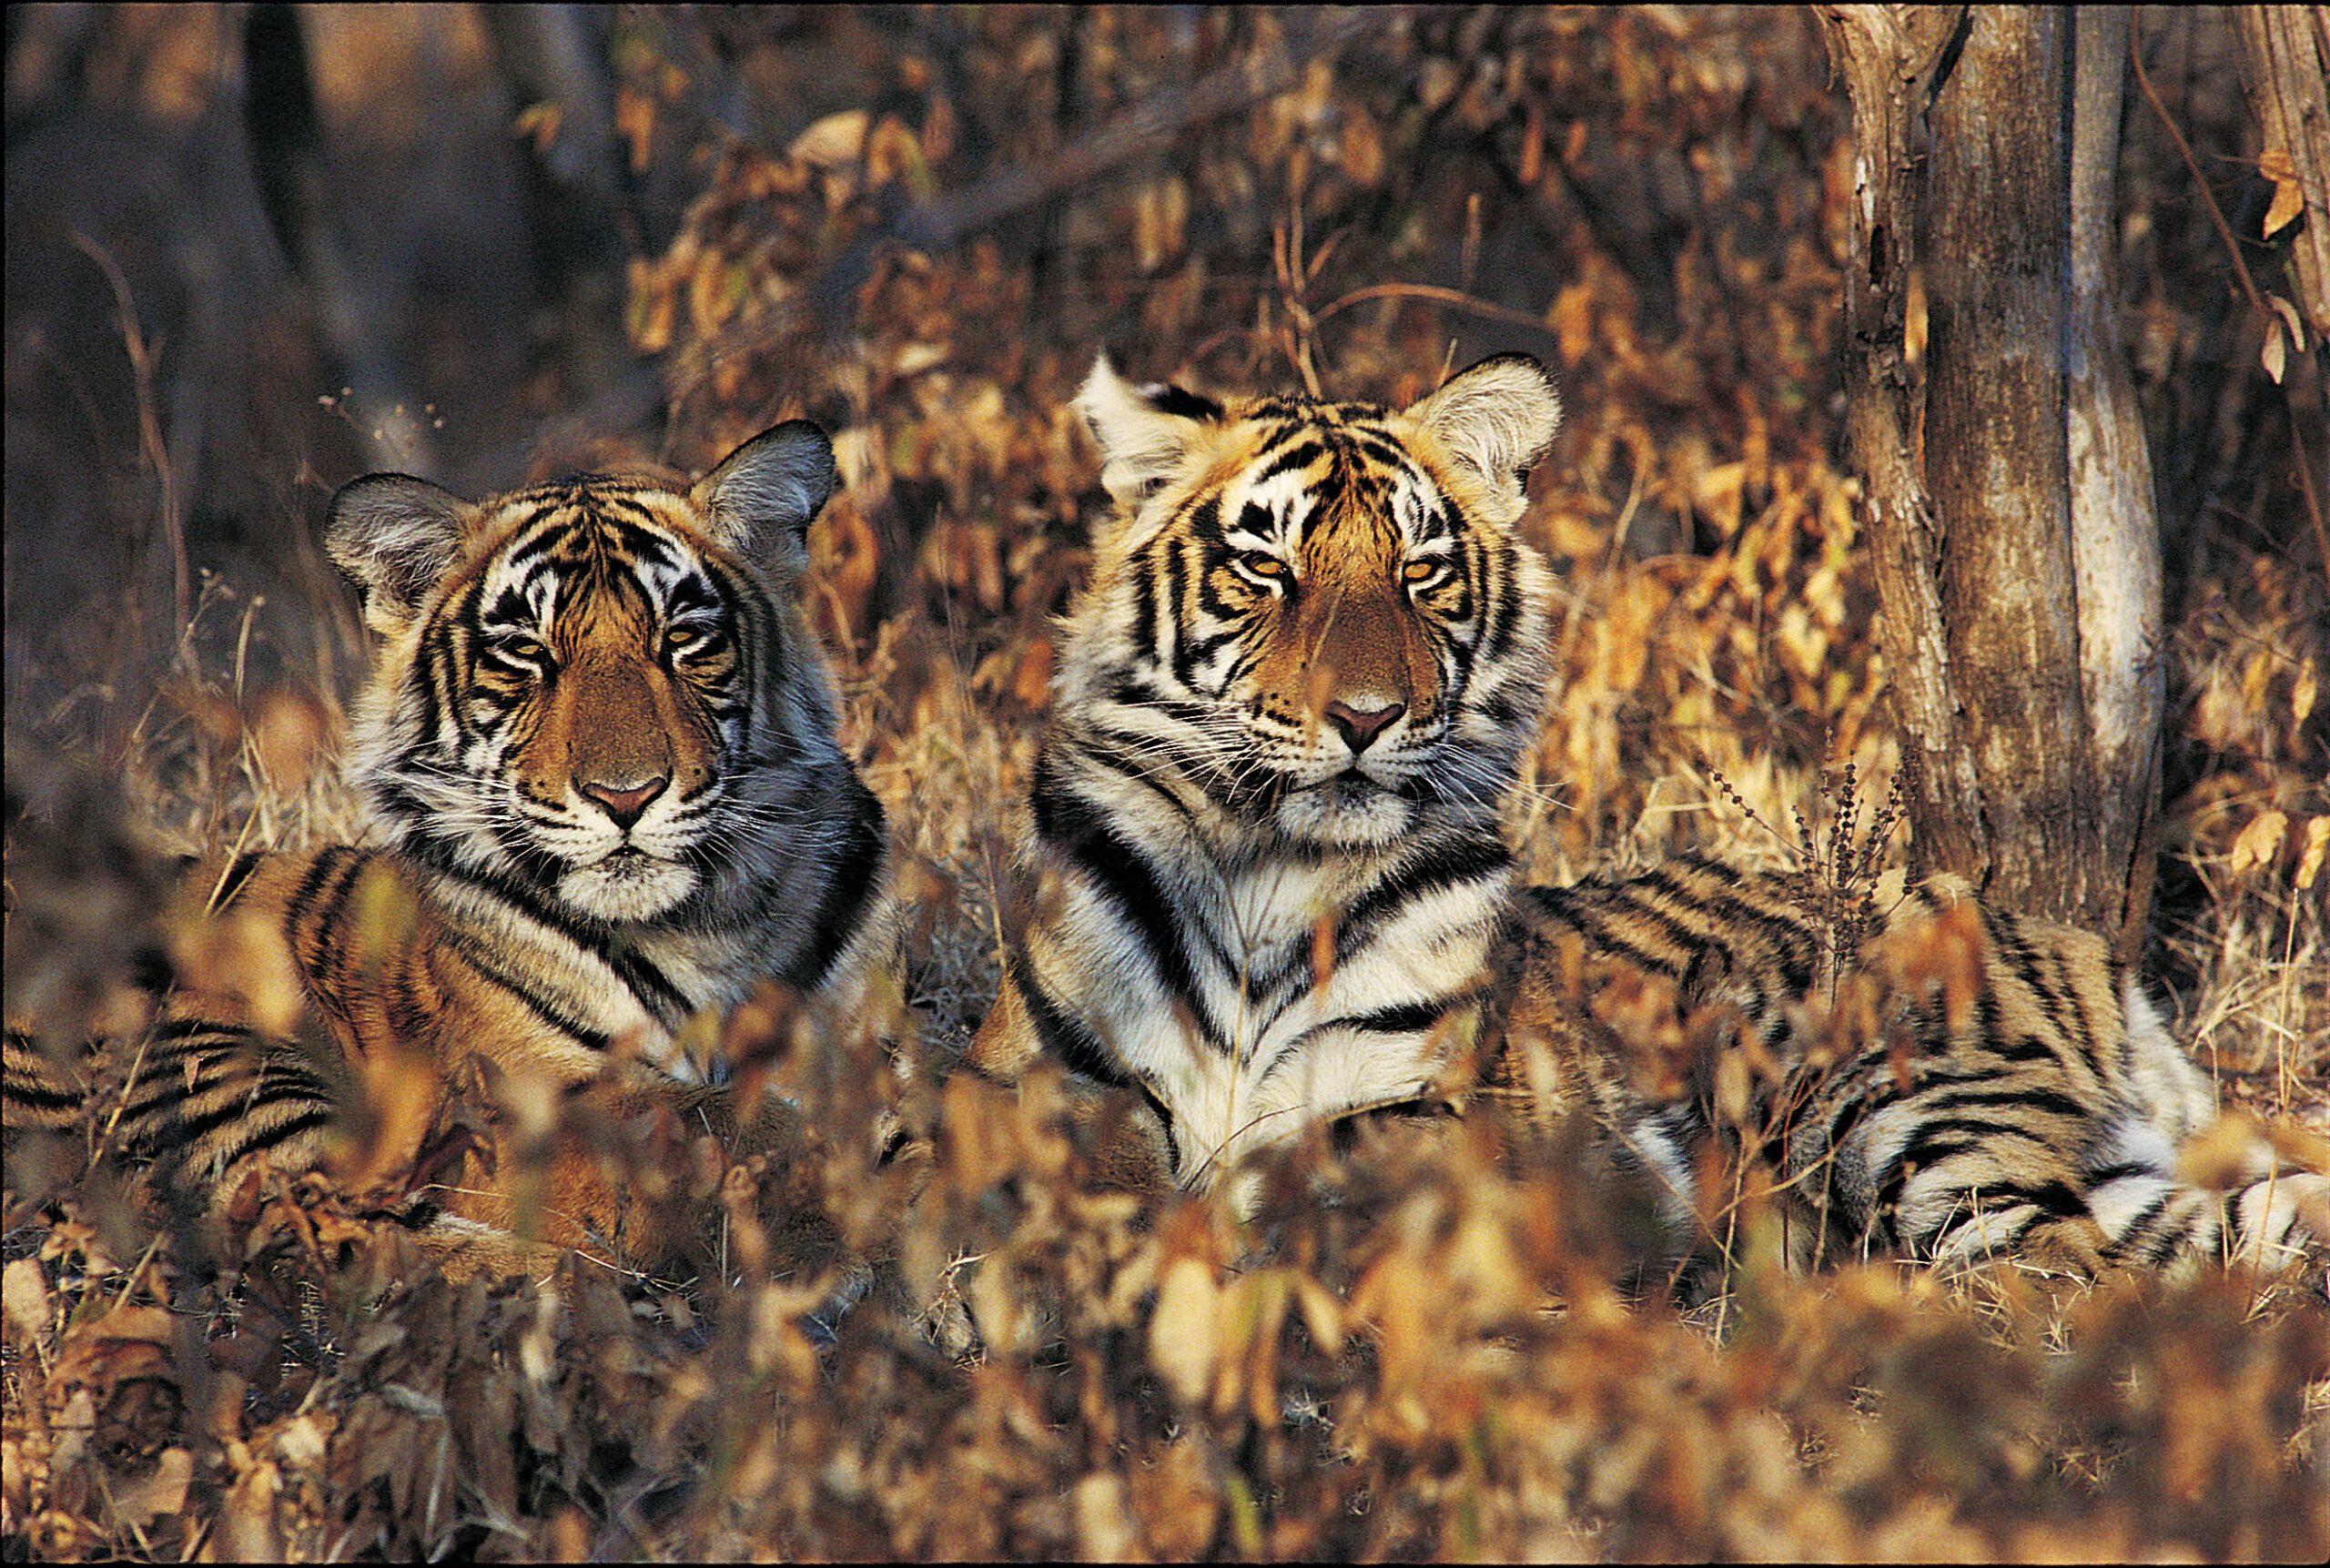 a couple of tigers sitting next to each other in a forest.